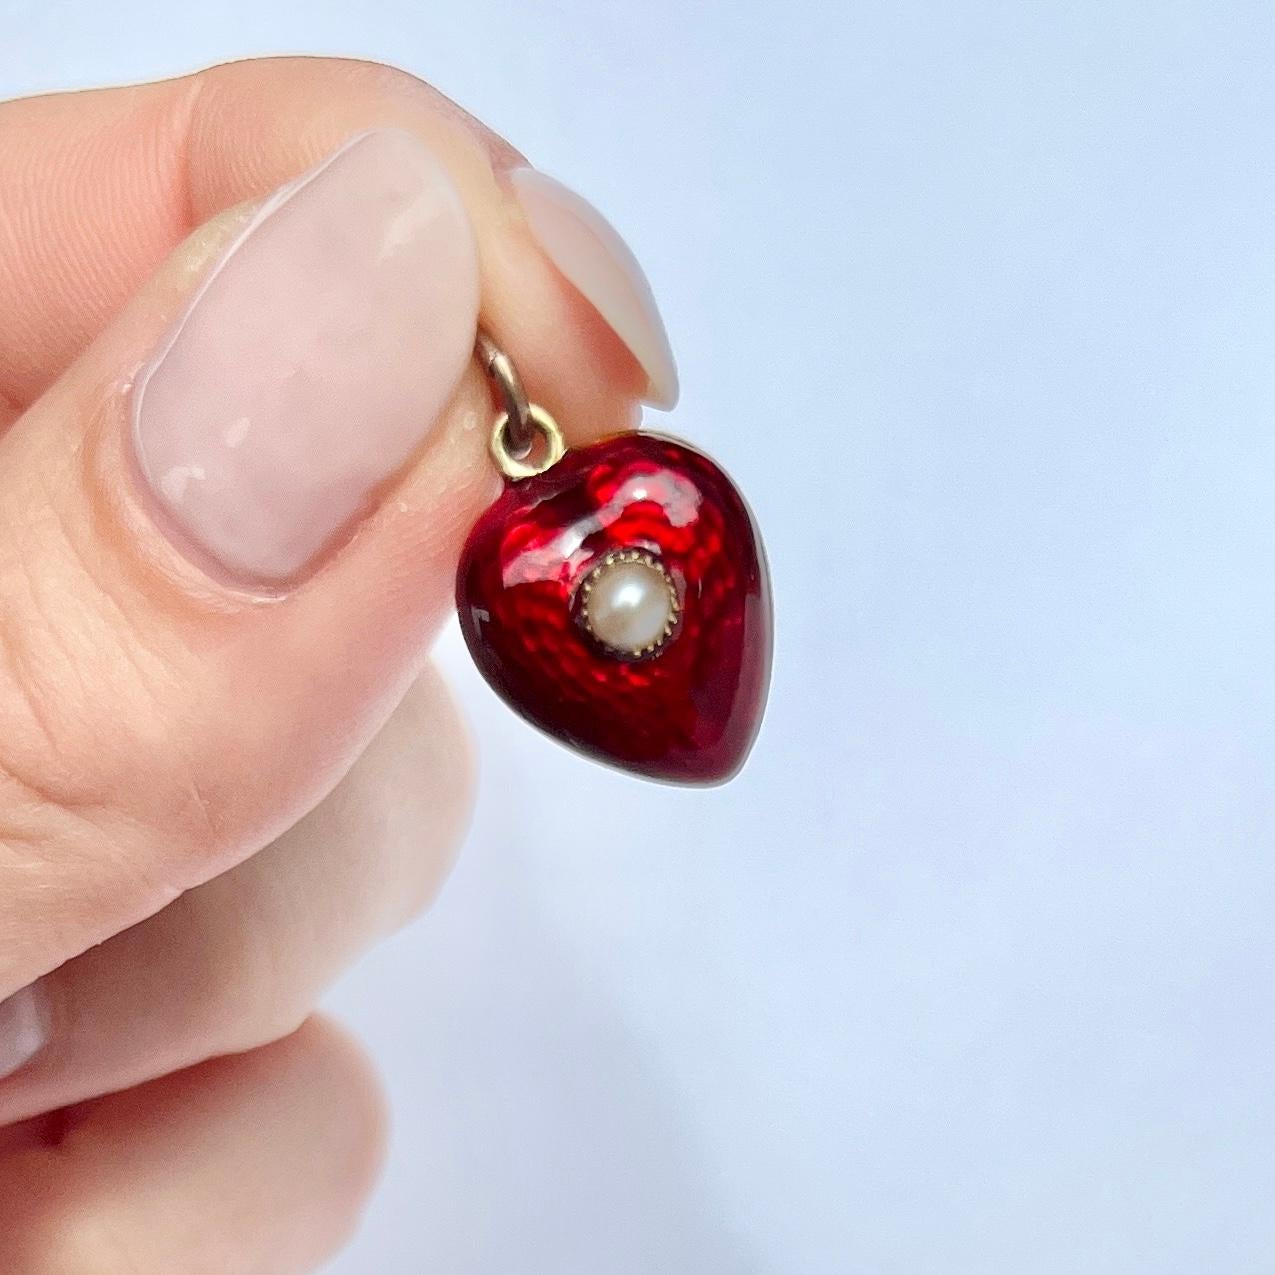 The enamel on this pendant is striking red and has a lovely shimmer to it. At the centre of the heart there is a sweet pearl. The pendant has a locket back and holds a lock of hair. 

Dimensions: 15x14mm

Weight: 2.5g